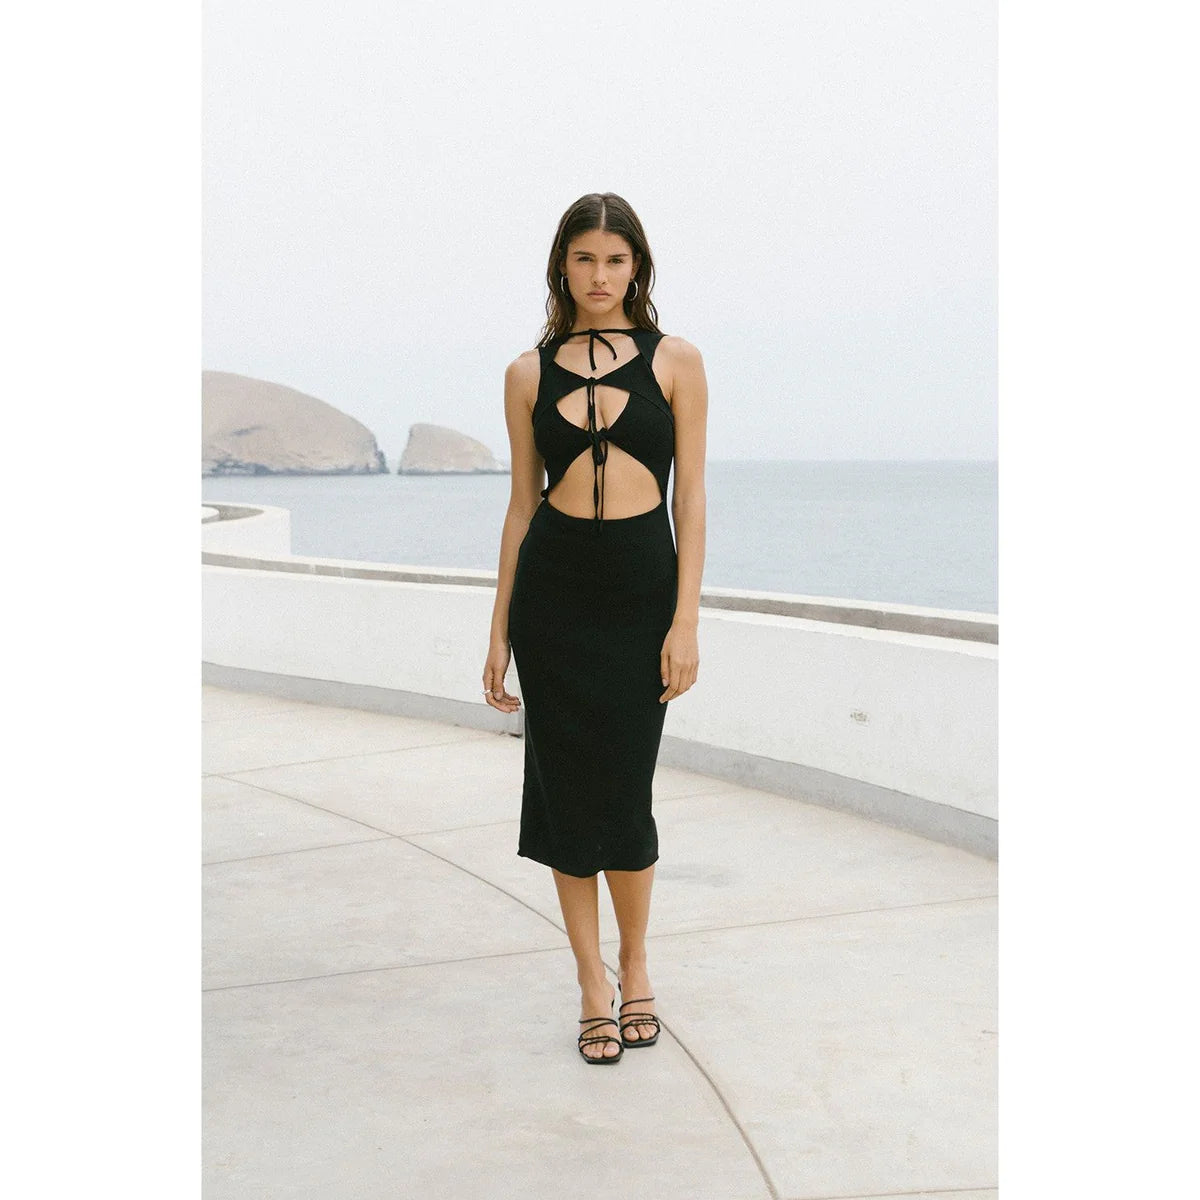 a model wearing a modern black dress with black sandals by OnPost in a pier with the sea behind